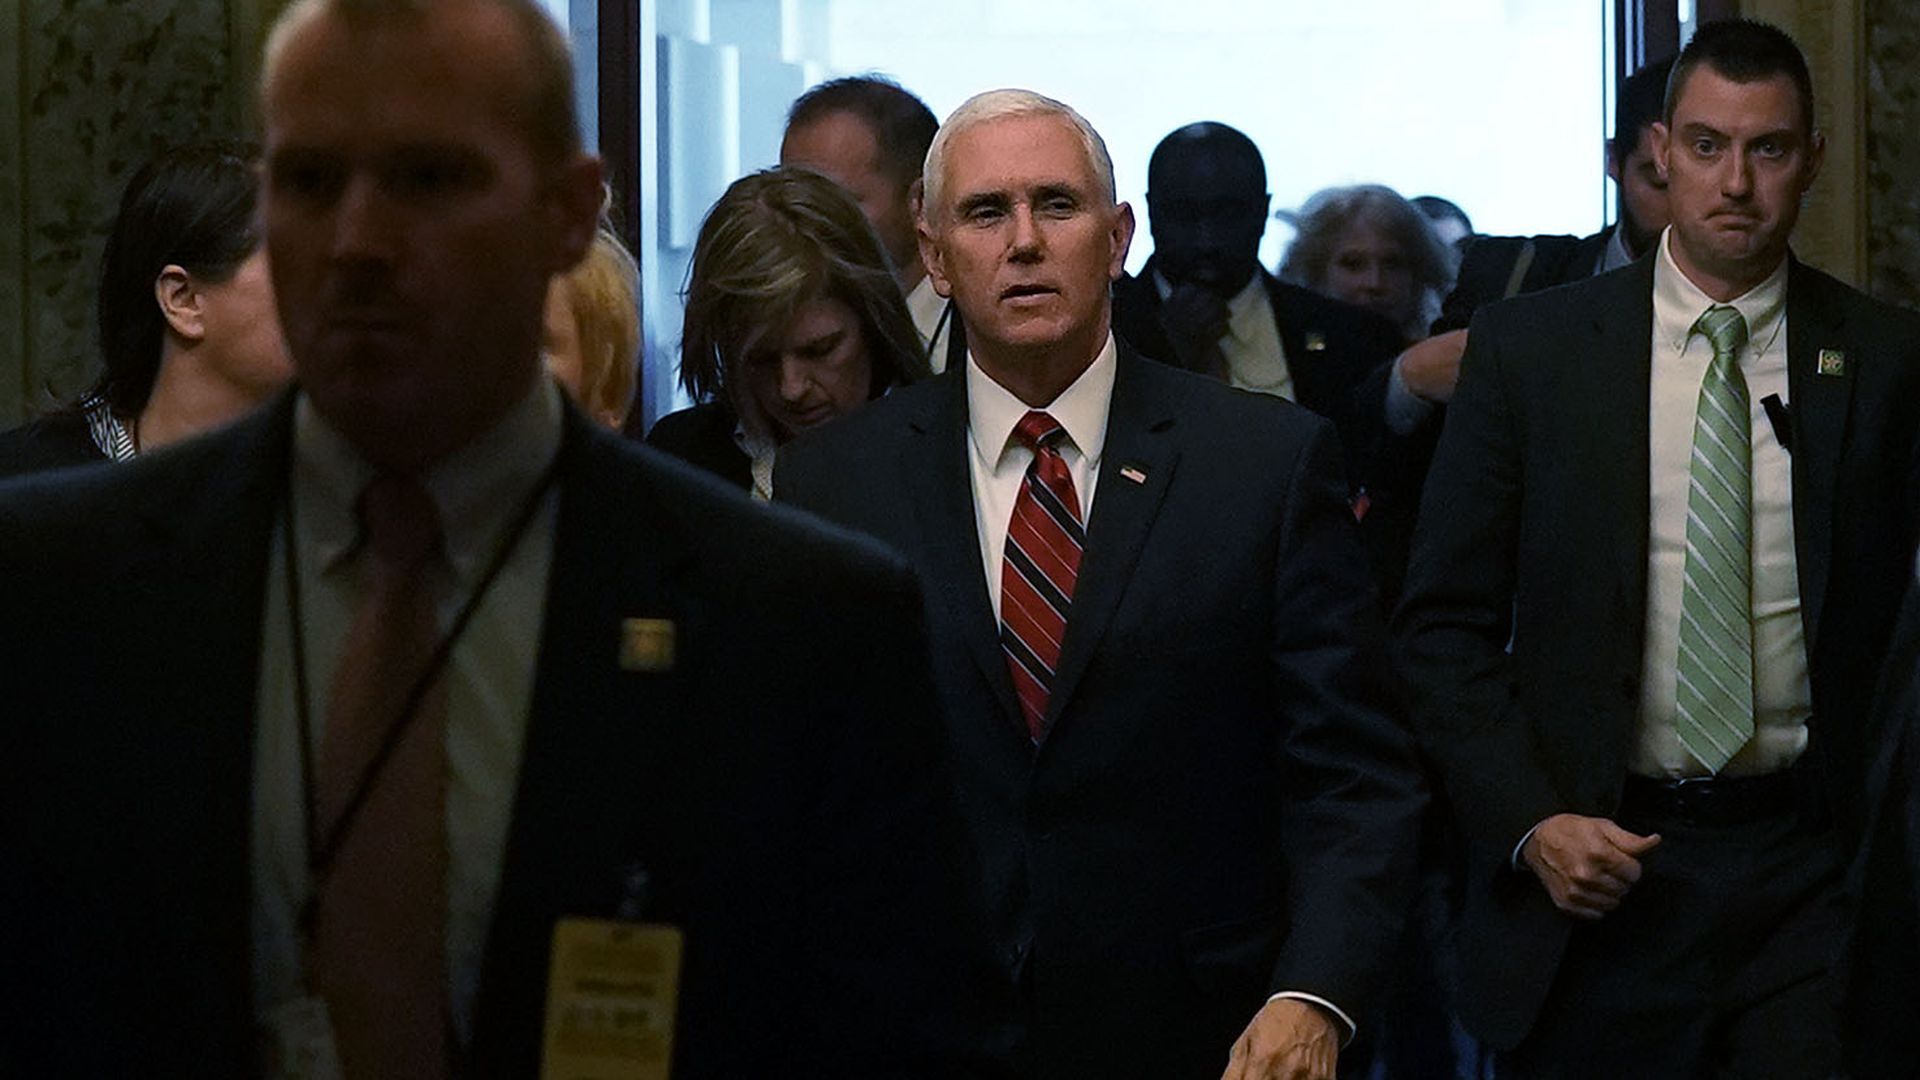 Vice President Mike Pence walks through a crowd of people at the Capitol